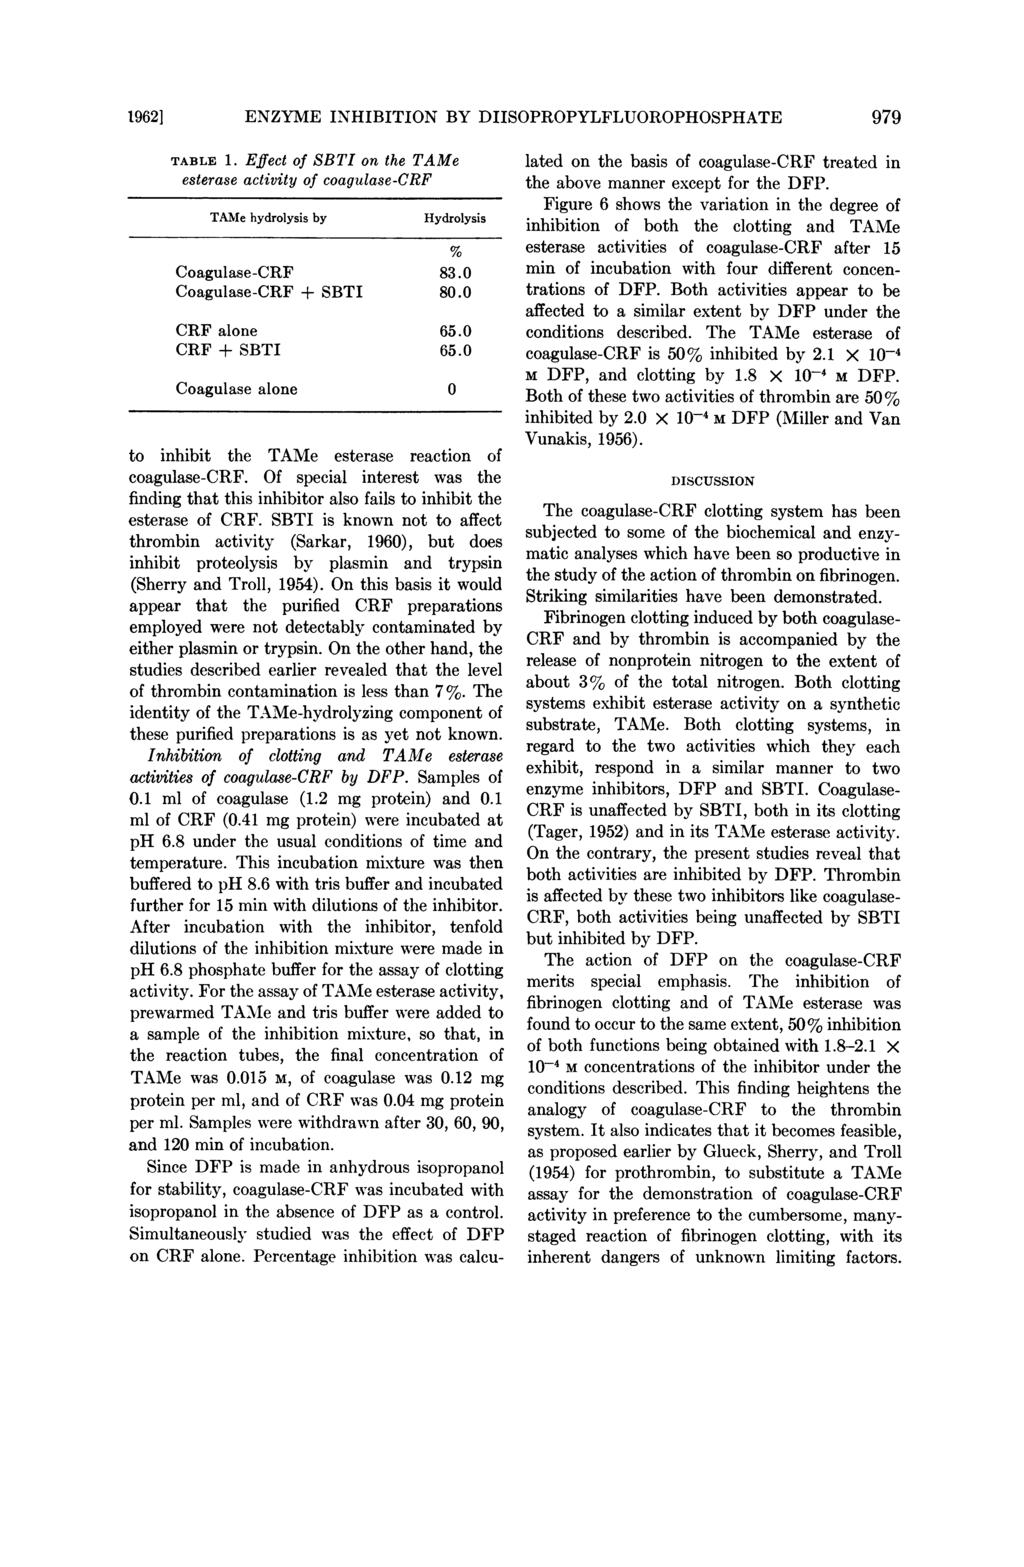 1962] ENZYME INHIBITION BY DIISOPROPYLFLUOROPHOSPHATE 979 TABLE 1. Effect of SBTI on the TAMe esterase activity of coagulase-crf TAMe hydrolysis by Hydrolysis Coagulase-CRF 83.